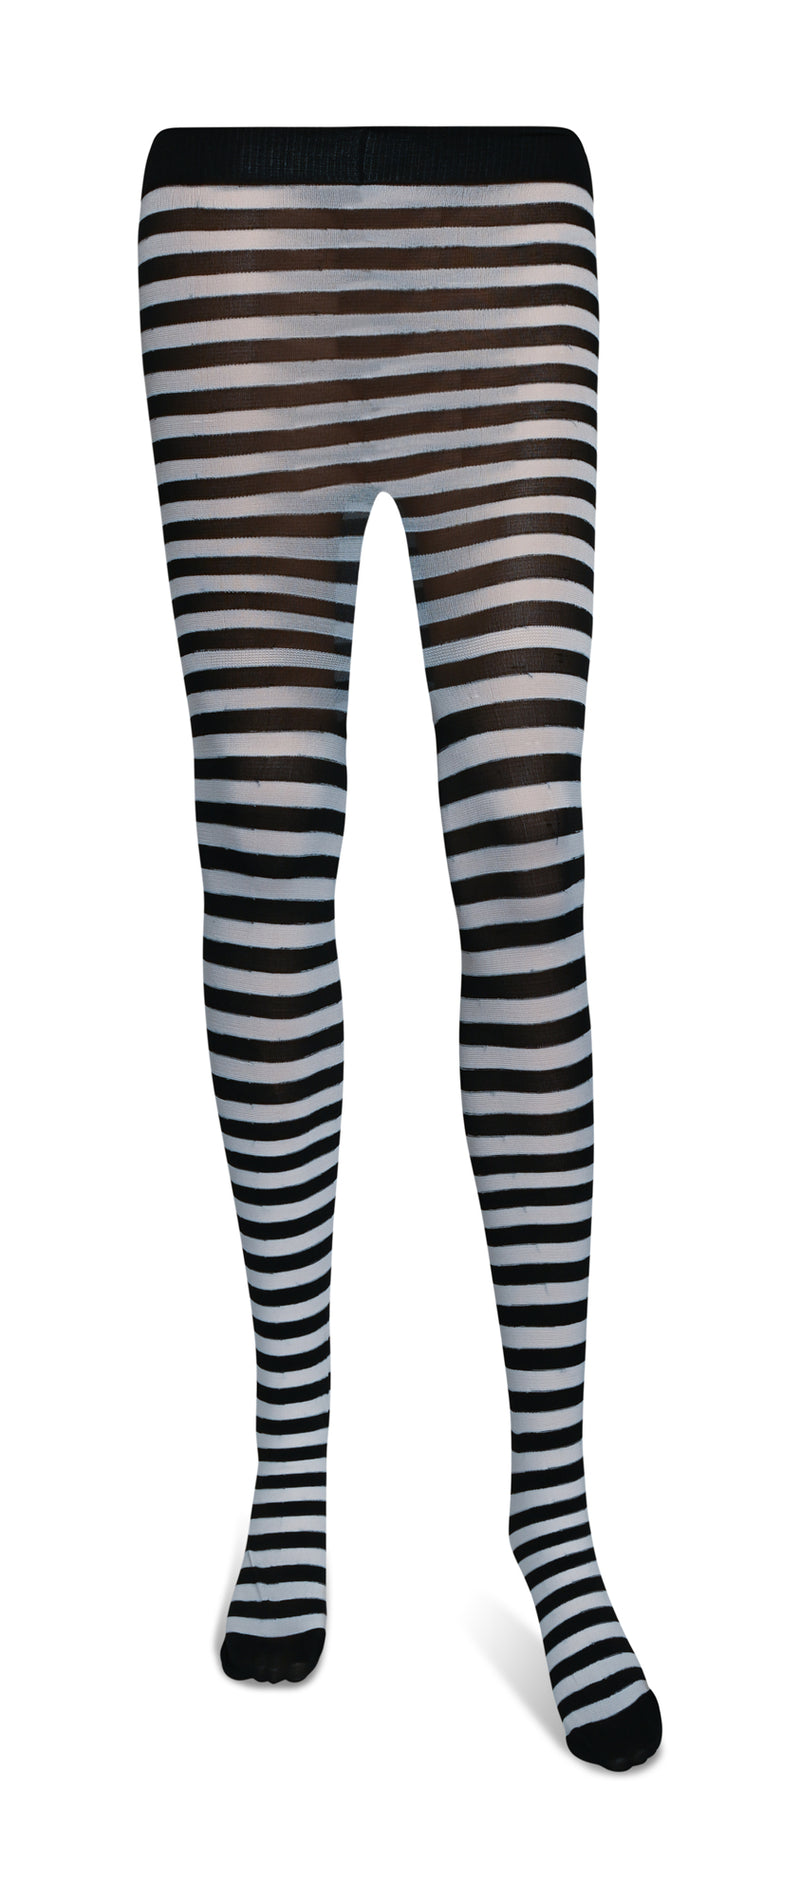 Black and White Striped Kids Tights